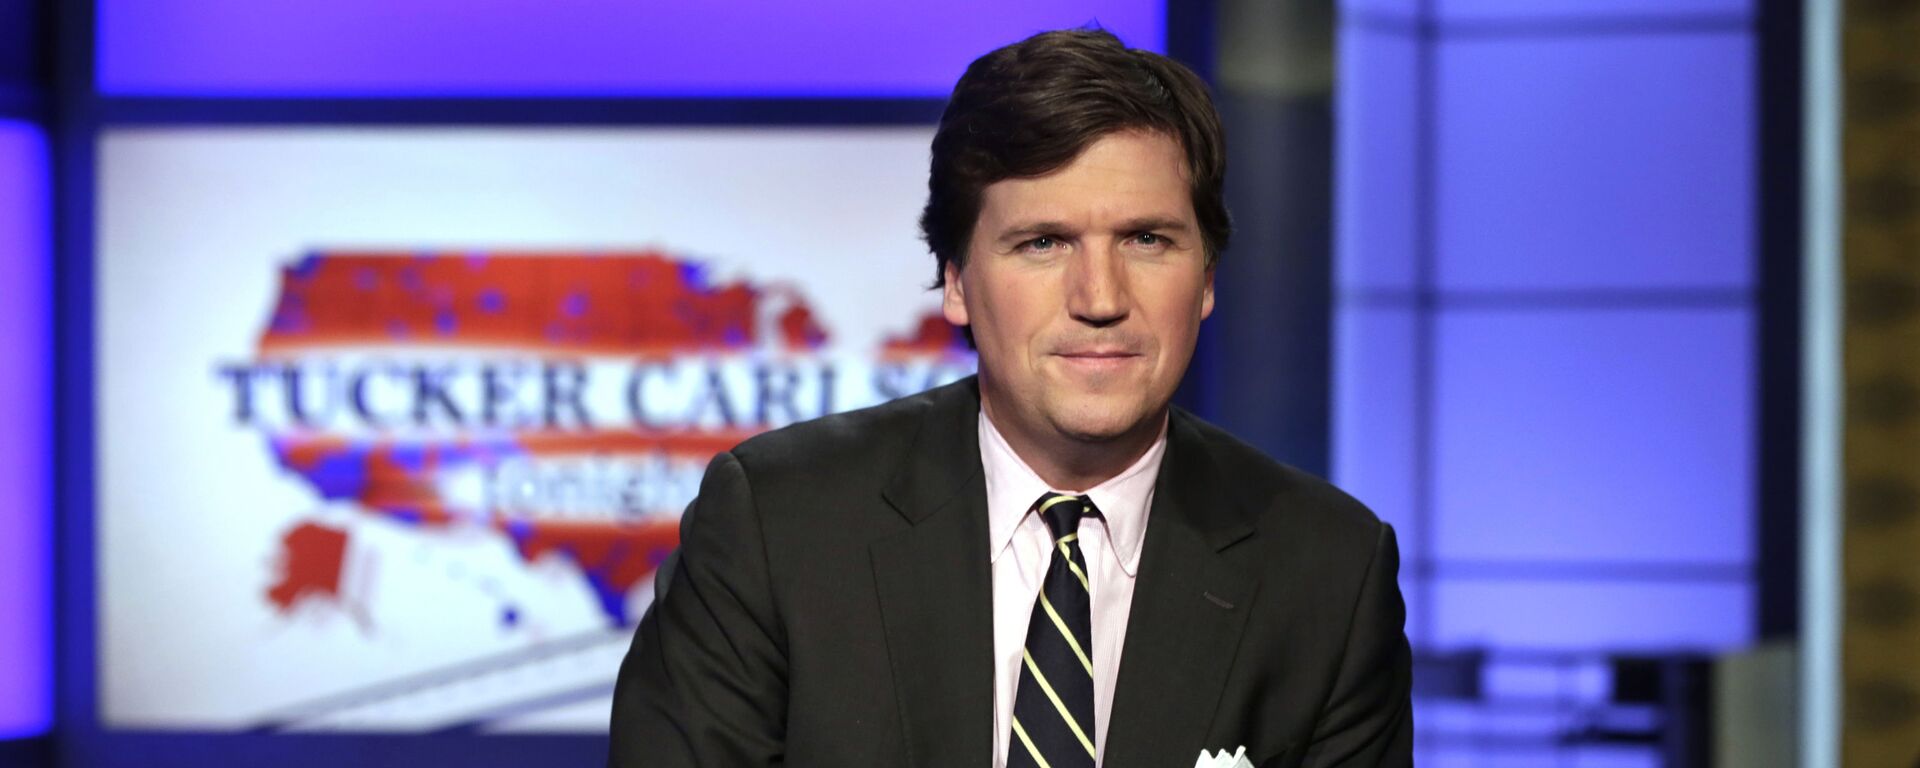 FILE - In this March 2, 2017 file photo, Tucker Carlson, host of Tucker Carlson Tonight, poses for photos in a Fox News Channel studio, in New York. Carlson, who on Monday's show addressed the story of his former top writer, Blake Neff, who resigned after CNN found he had written a series of controversial tweets under a pseudonym, has left for vacation. It fits a pattern at Fox, whose personalities tend to go away to cool off when the heat is on. Carlson's vacation is the sixth example in a little more than three years. A Fox representative confirmed Carlson's vacation was planned before the Neff story broke. (AP Photo/Richard Drew, File) - Sputnik International, 1920, 11.03.2021